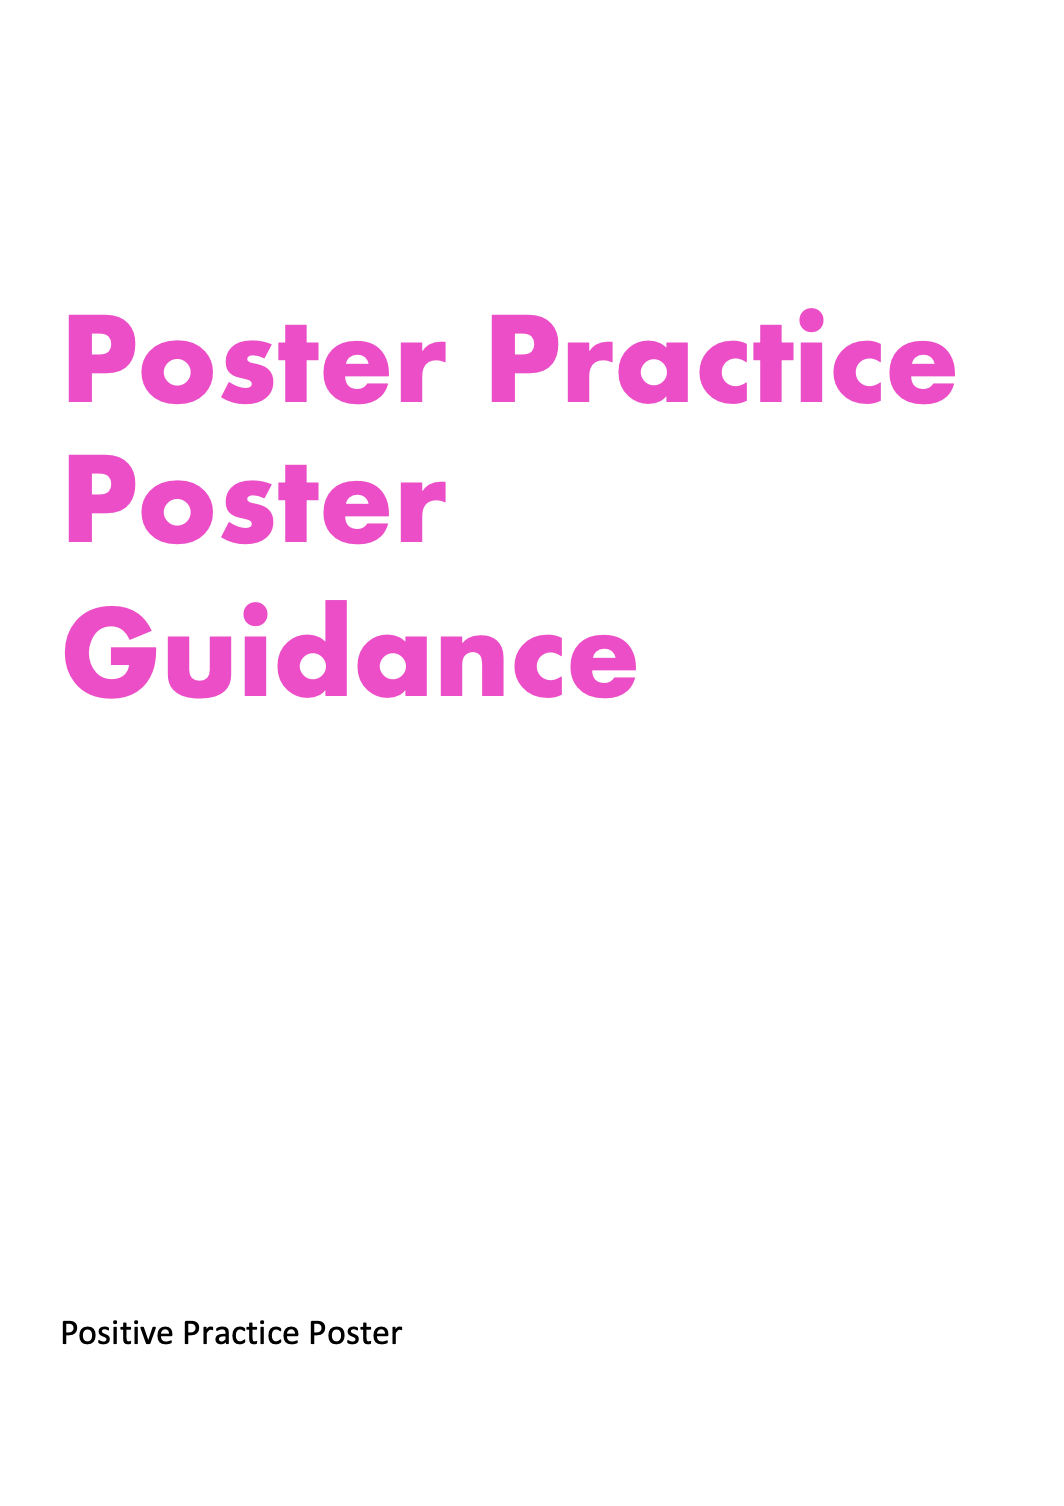 Positive Practise Poster Guidance